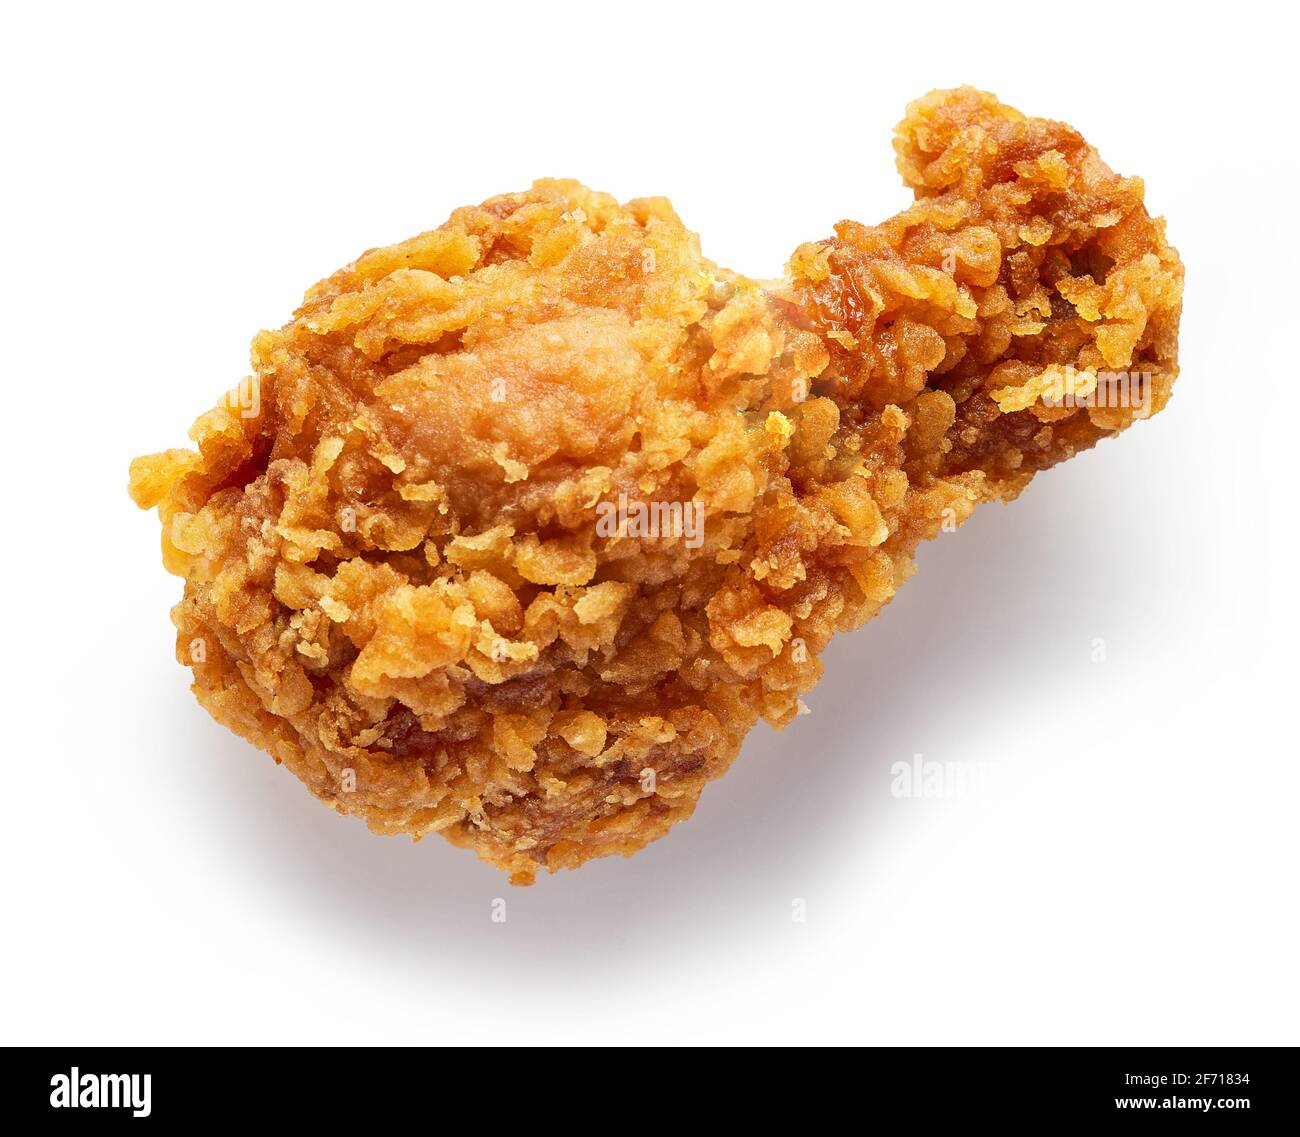 fried breaded chicken wing isolated on white background, top view Stock Photo